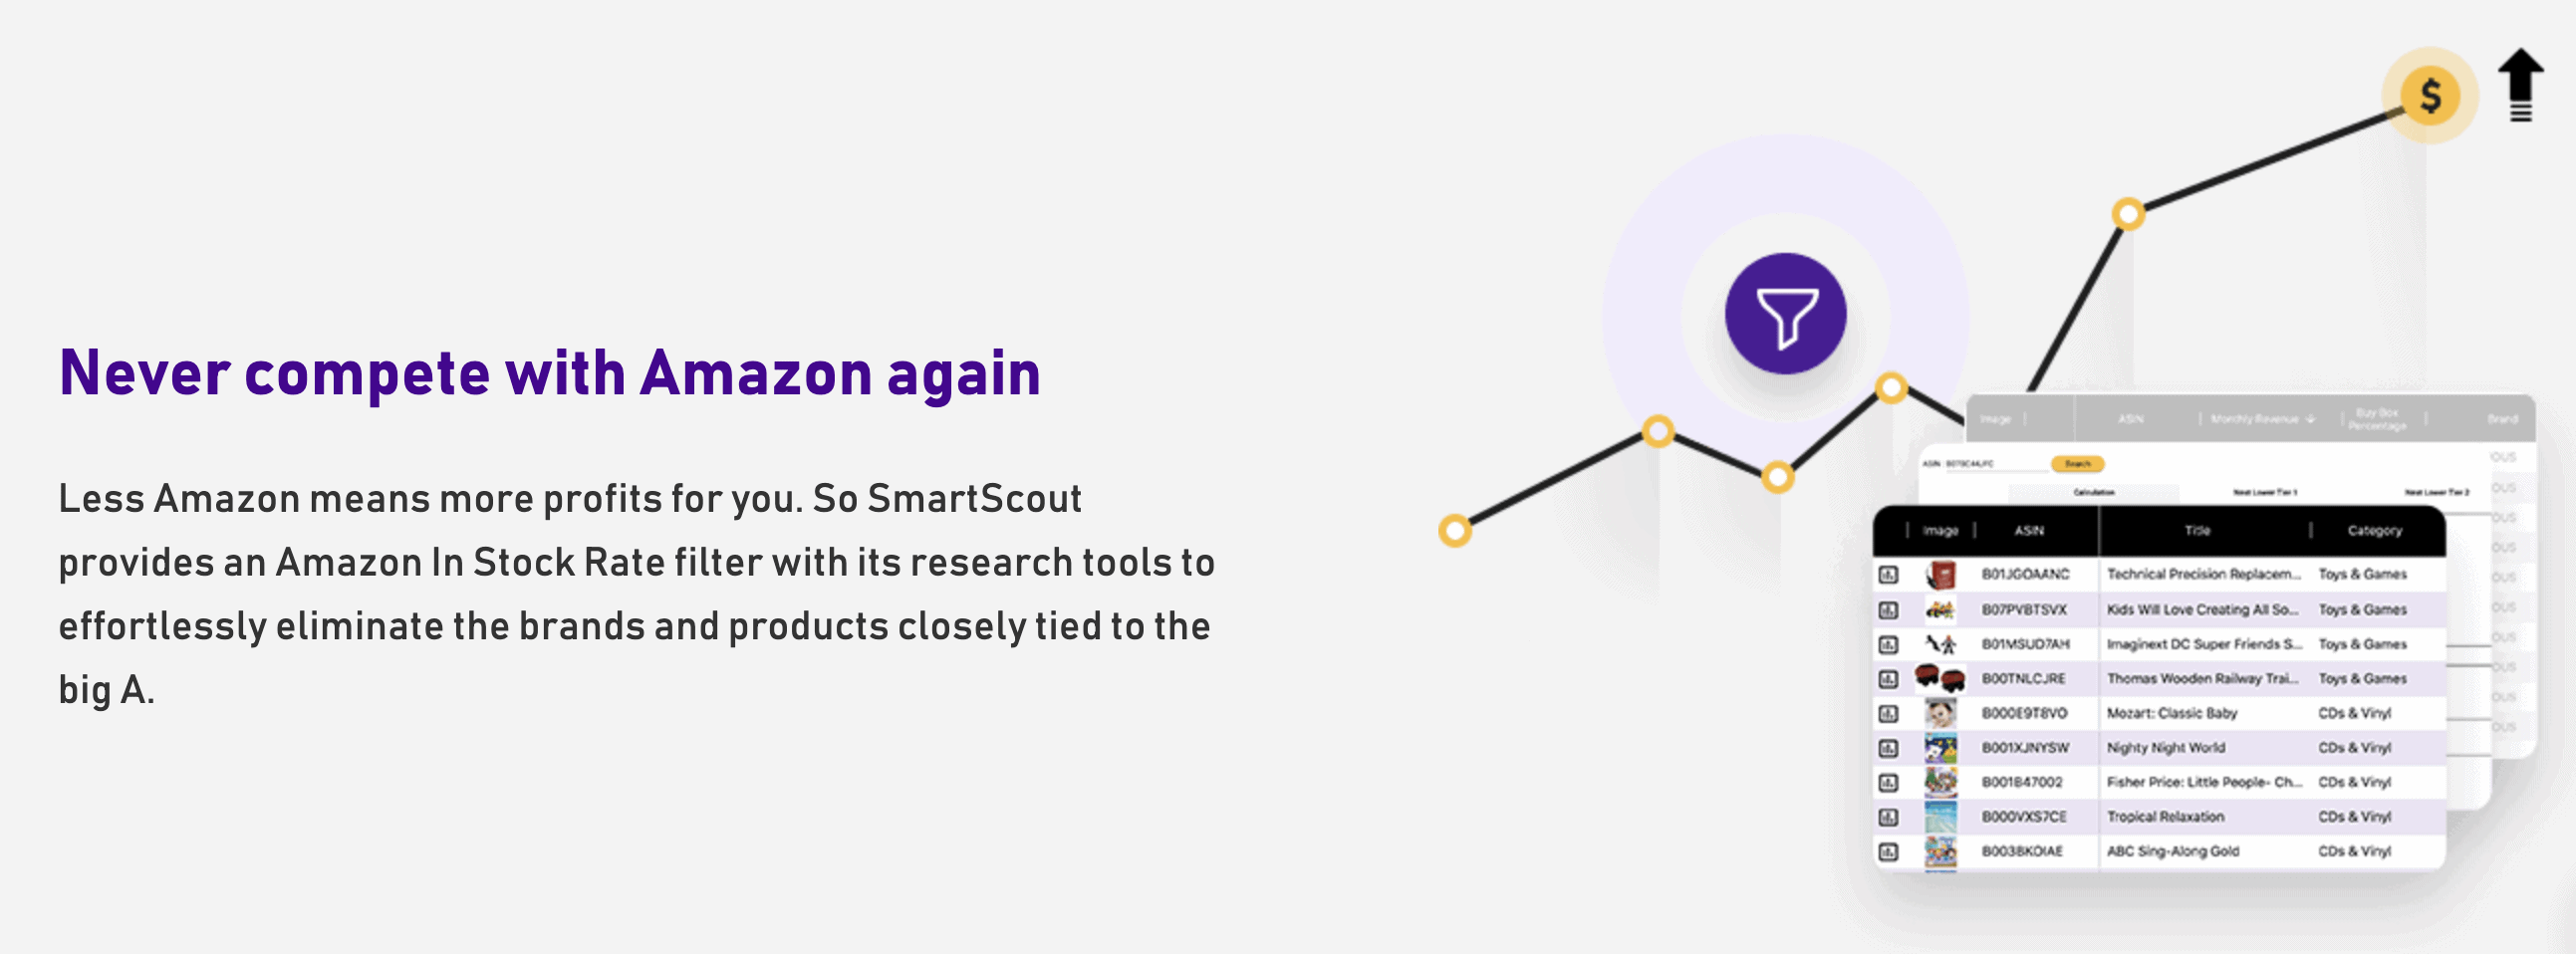 Smartscout features